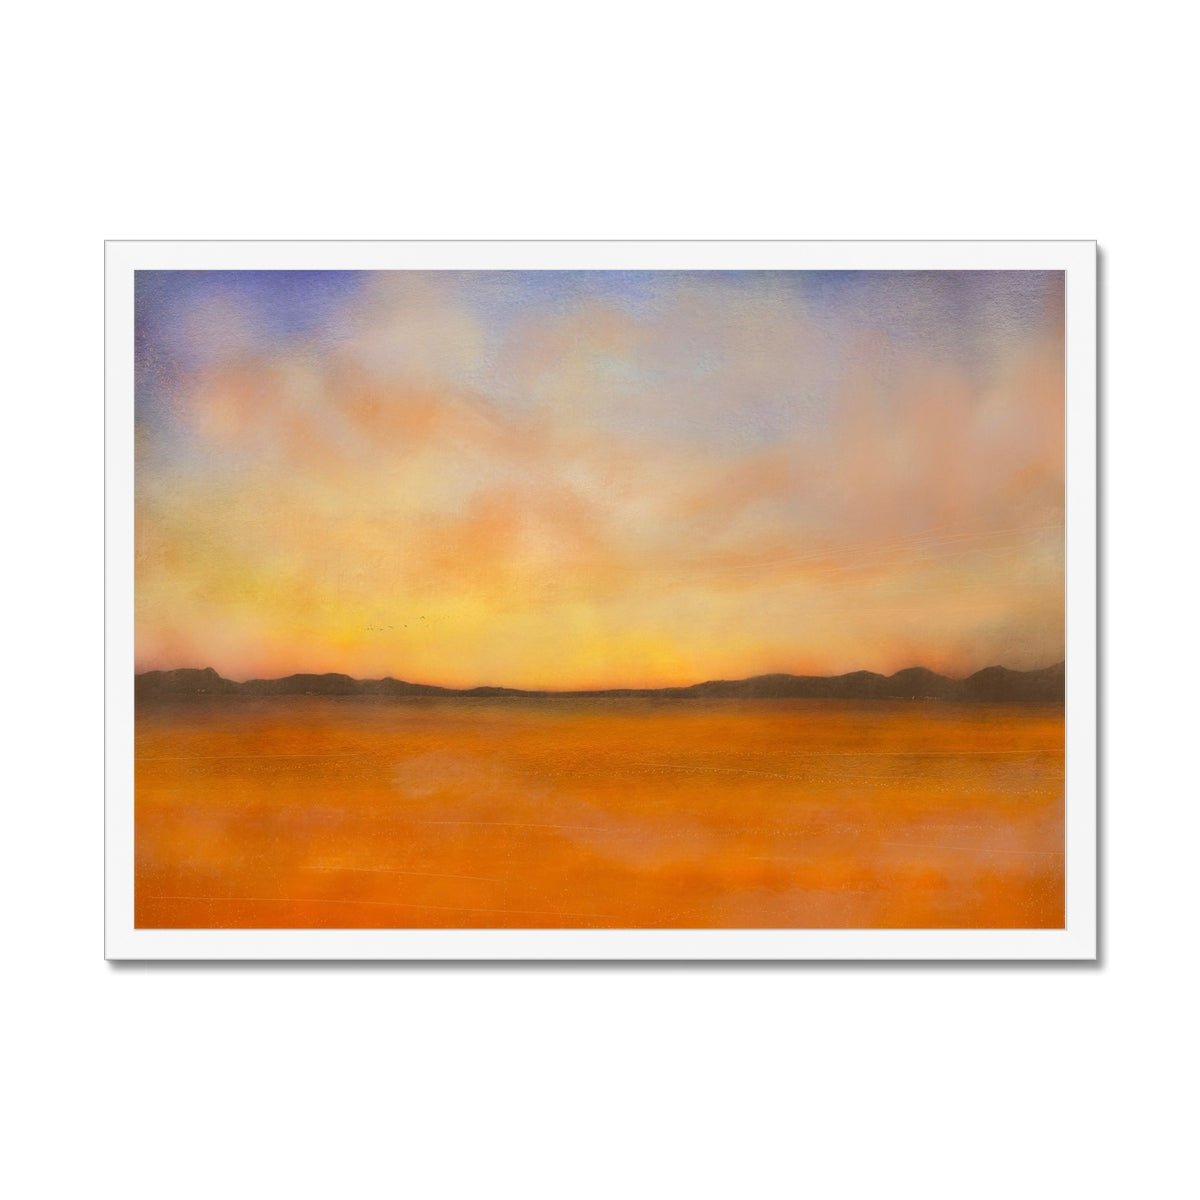 Islay Dawn Painting | Framed Prints From Scotland-Framed Prints-Hebridean Islands Art Gallery-A2 Landscape-White Frame-Paintings, Prints, Homeware, Art Gifts From Scotland By Scottish Artist Kevin Hunter